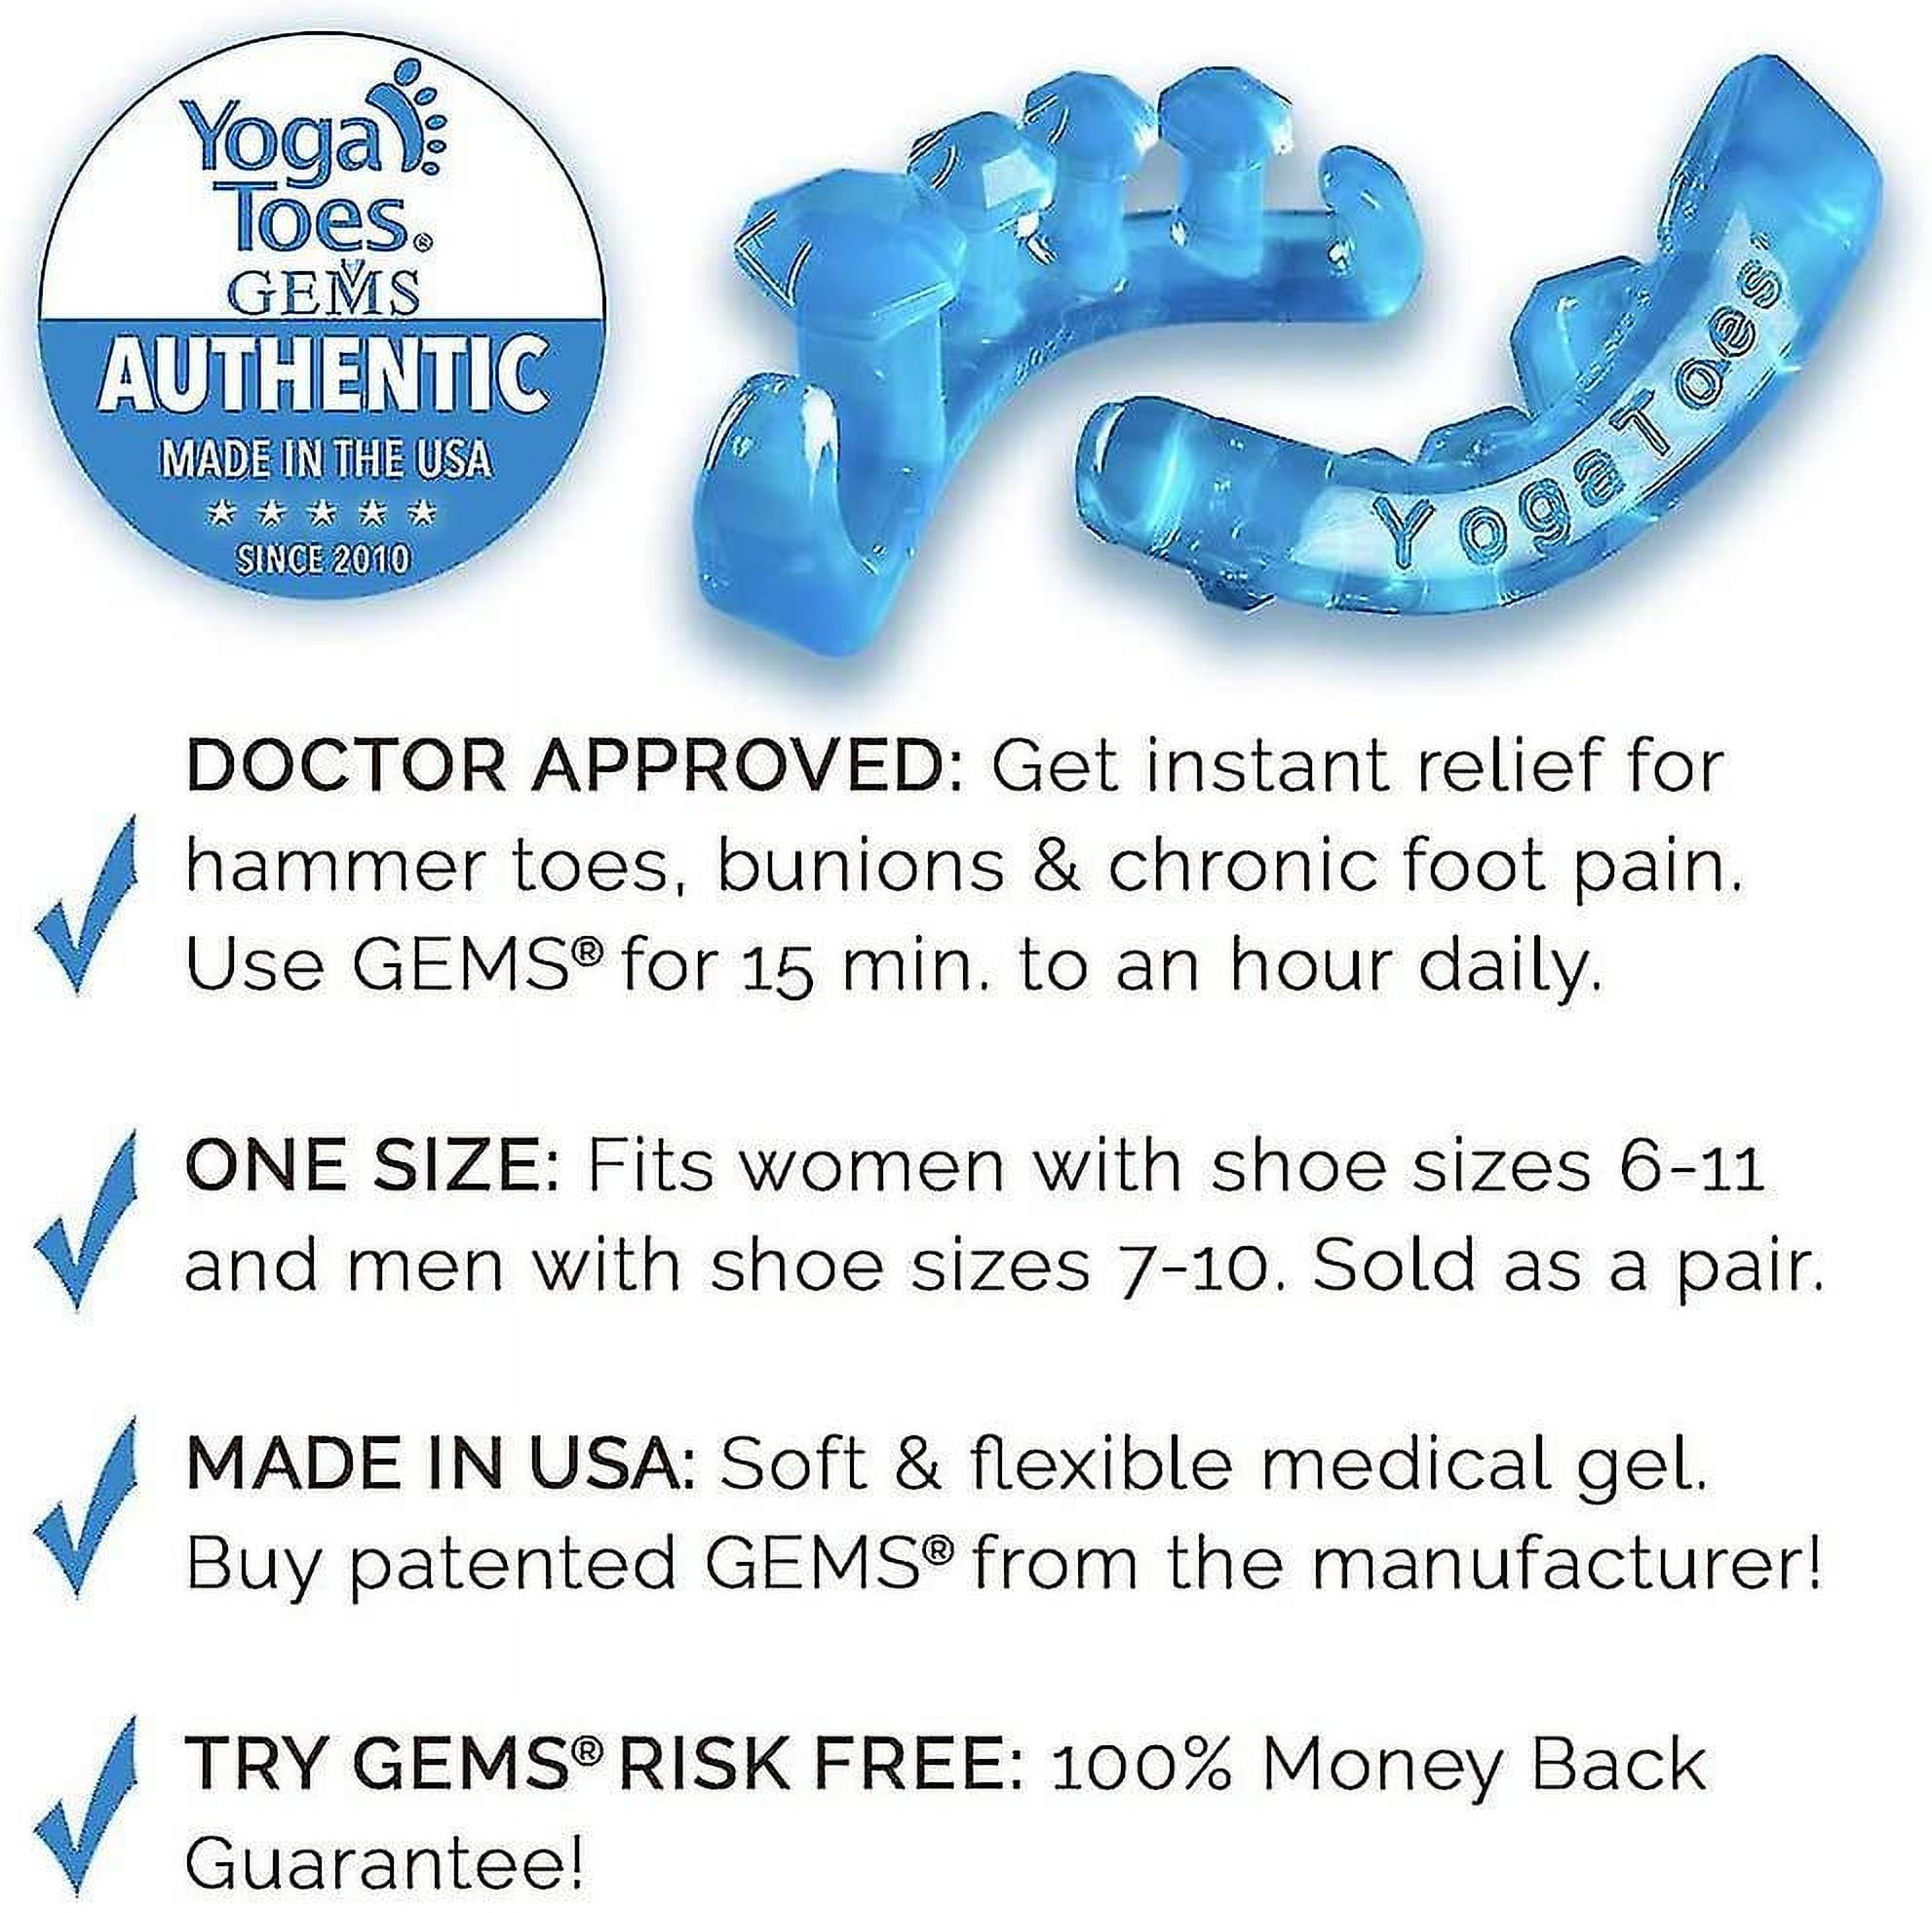 Yogatoes Gems: Gel Toe Stretcher Toe Separator - Americas Choice For  Fighting Bunions, Hammer Toes, More!